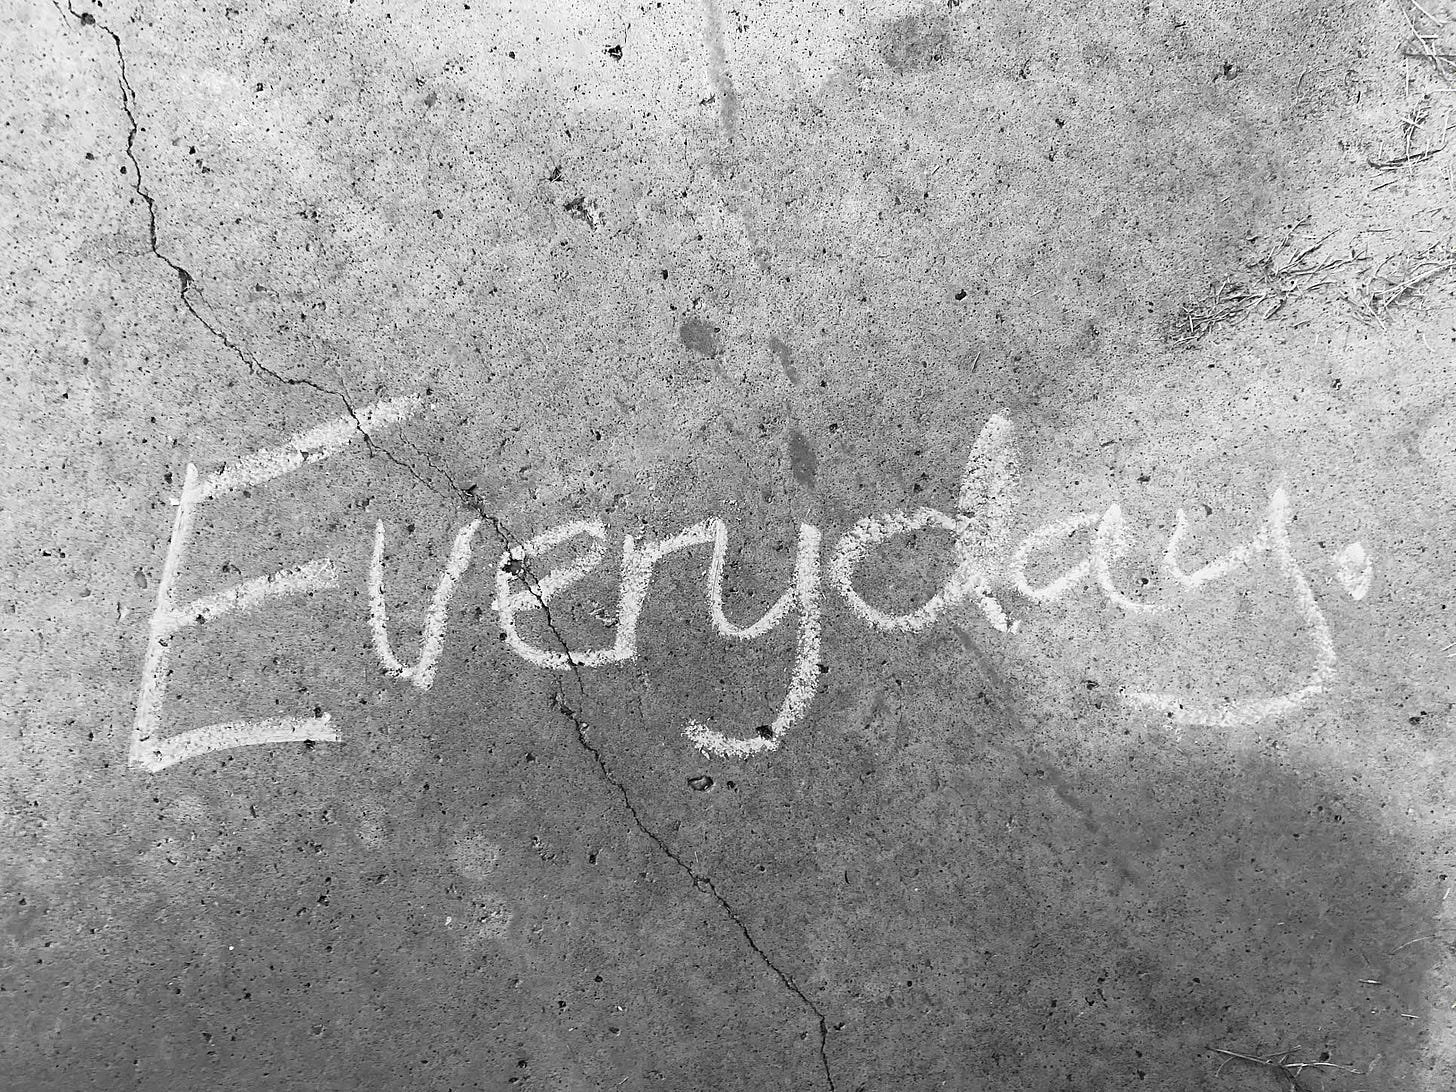 black and white photo of "everyday" written on concrete with chalk